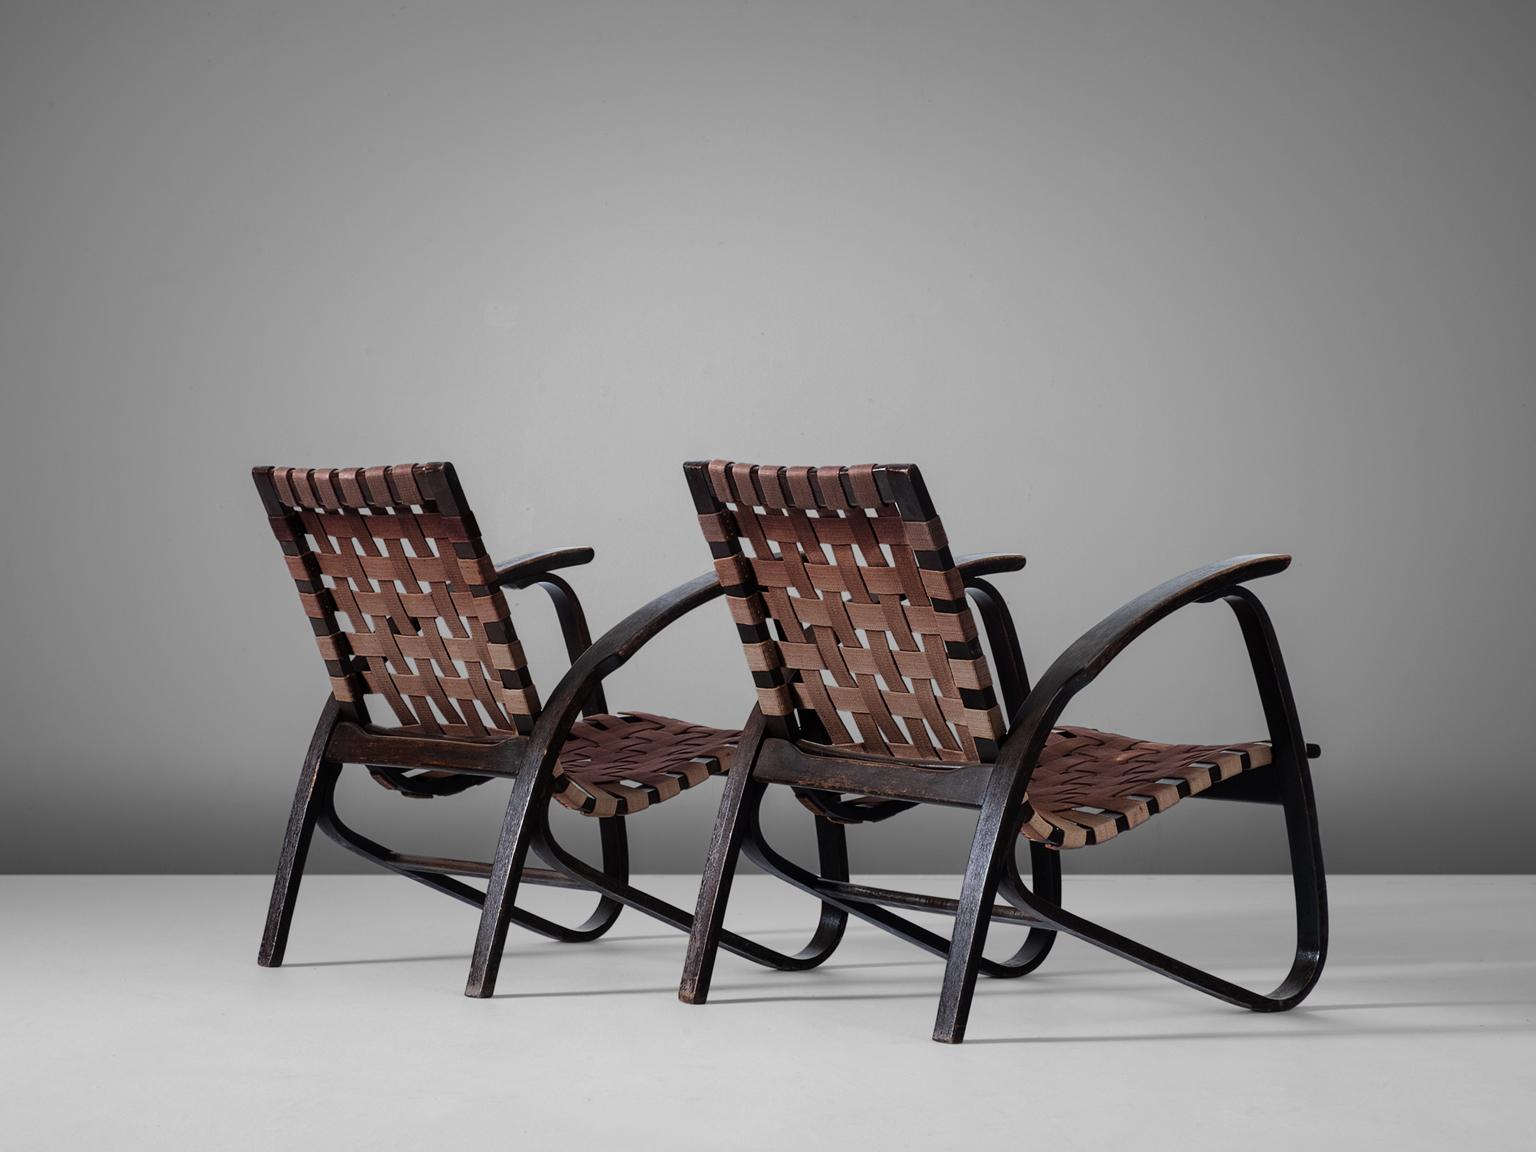 Pair of lounge chairs, in wood and canvas, by Jan Vanek for UP Zavodny, Czech Republic, 1930s.

Stunning pair of dynamic armchairs designed by Czech architect Jan Vanek, who was a contemporary of Jindrich Halabala. These chairs are upholstered